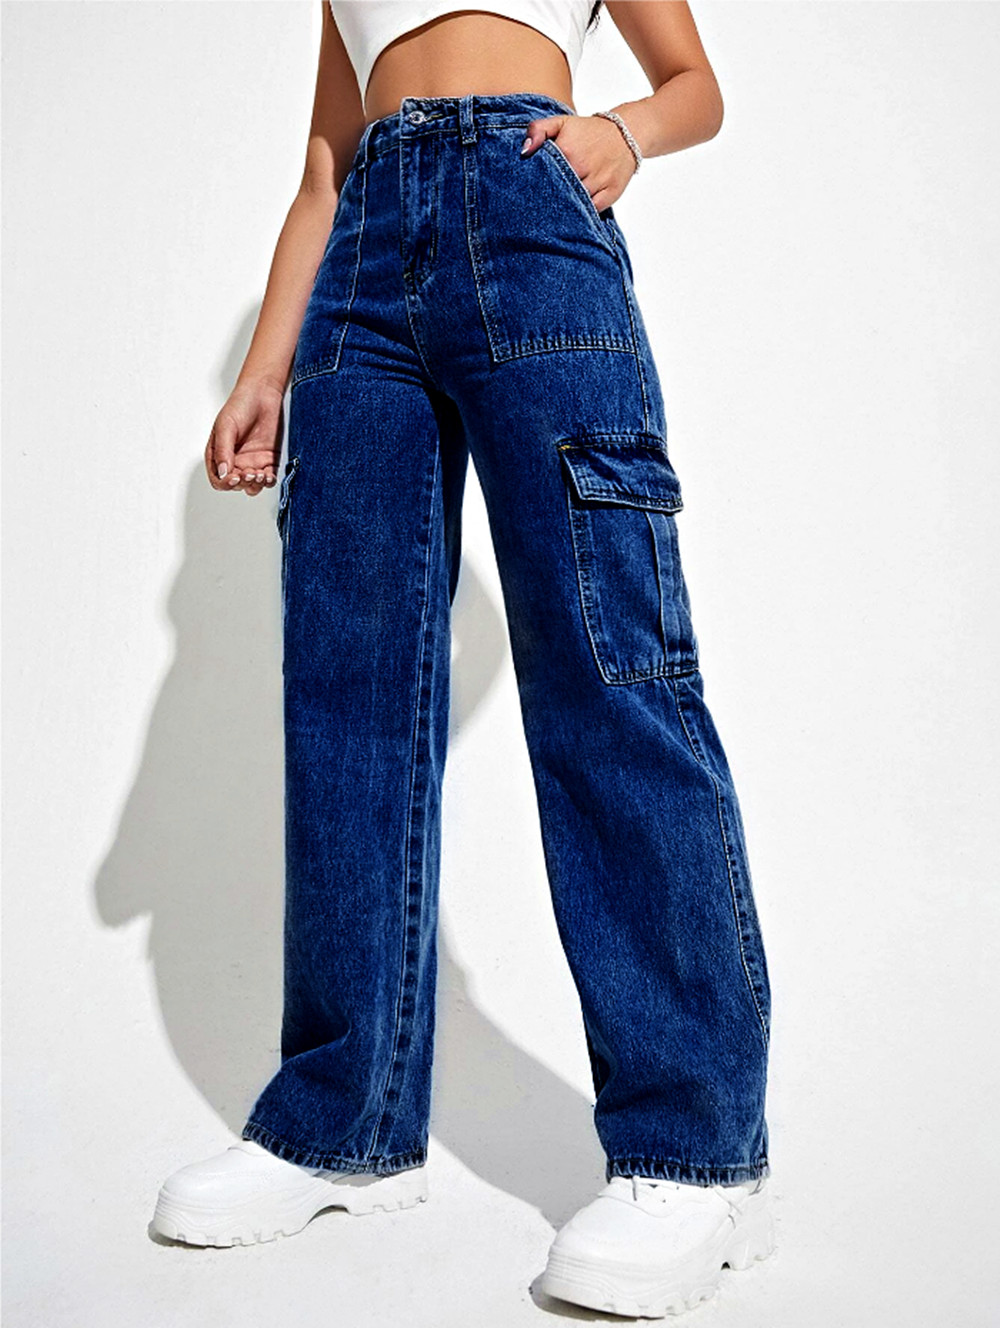 Trendy Wideleg Jeans for Her